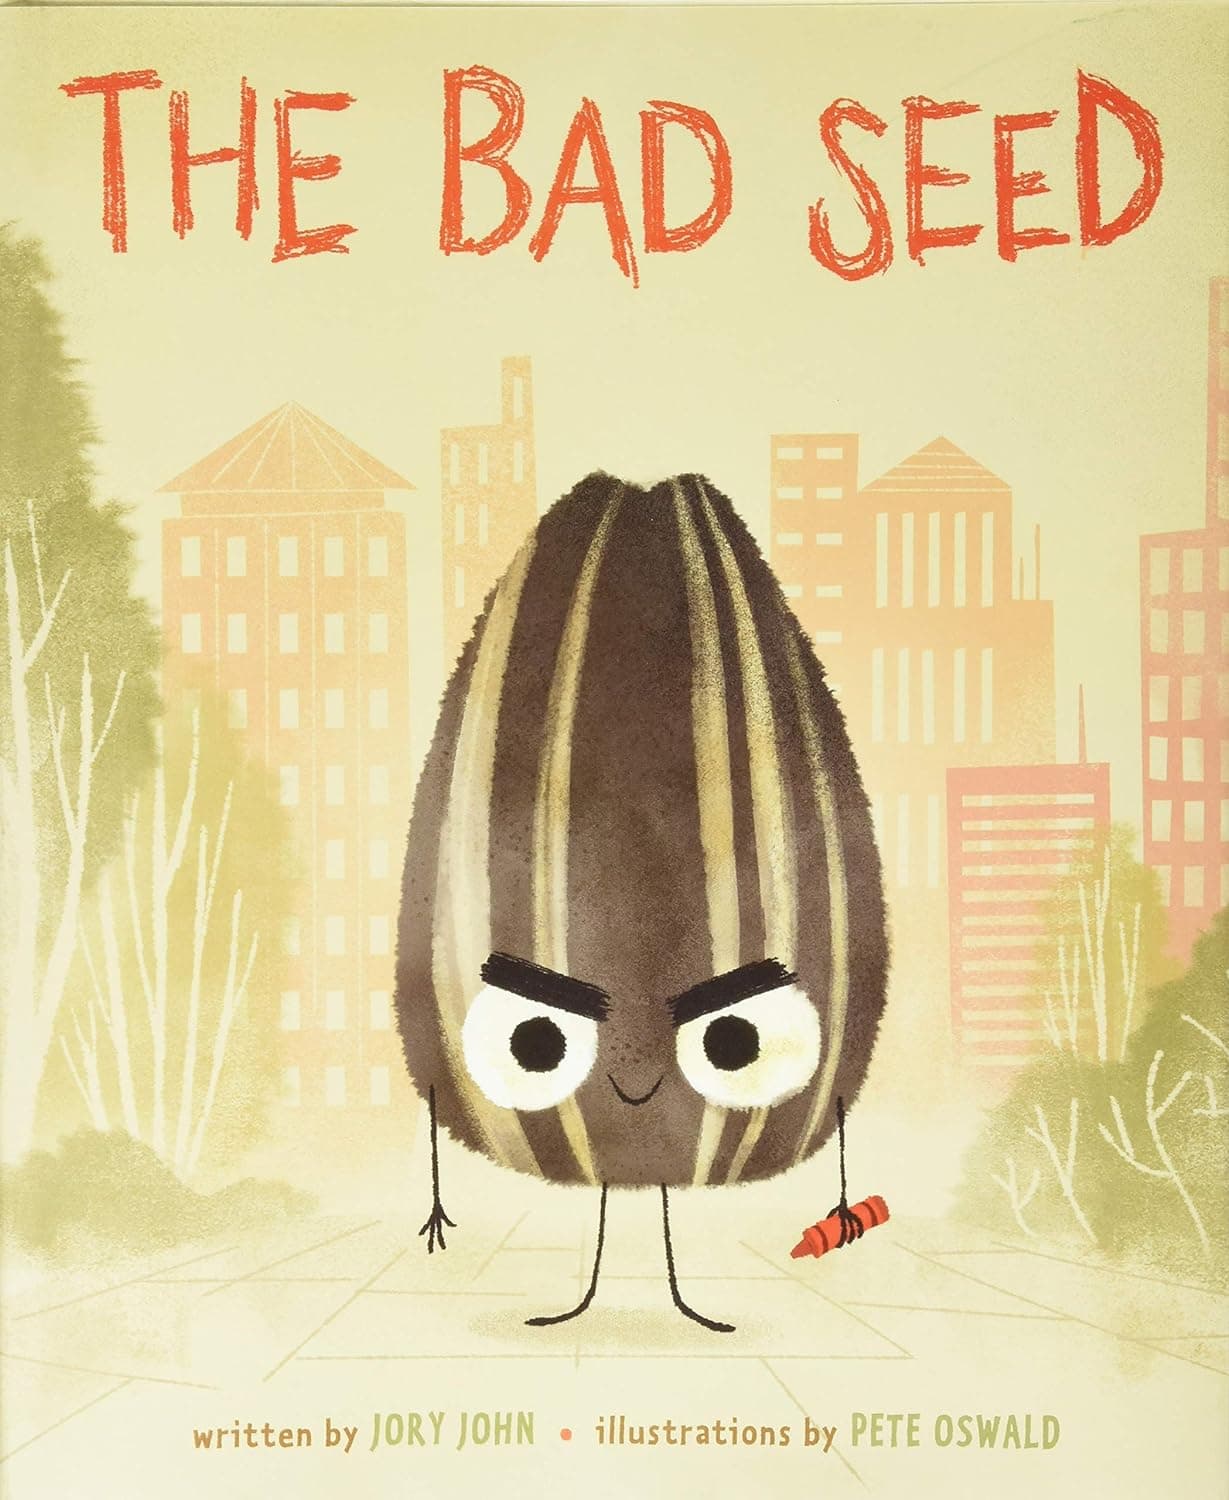 The Bad Seed by Jory John and Illustrated by Pete Oswalk